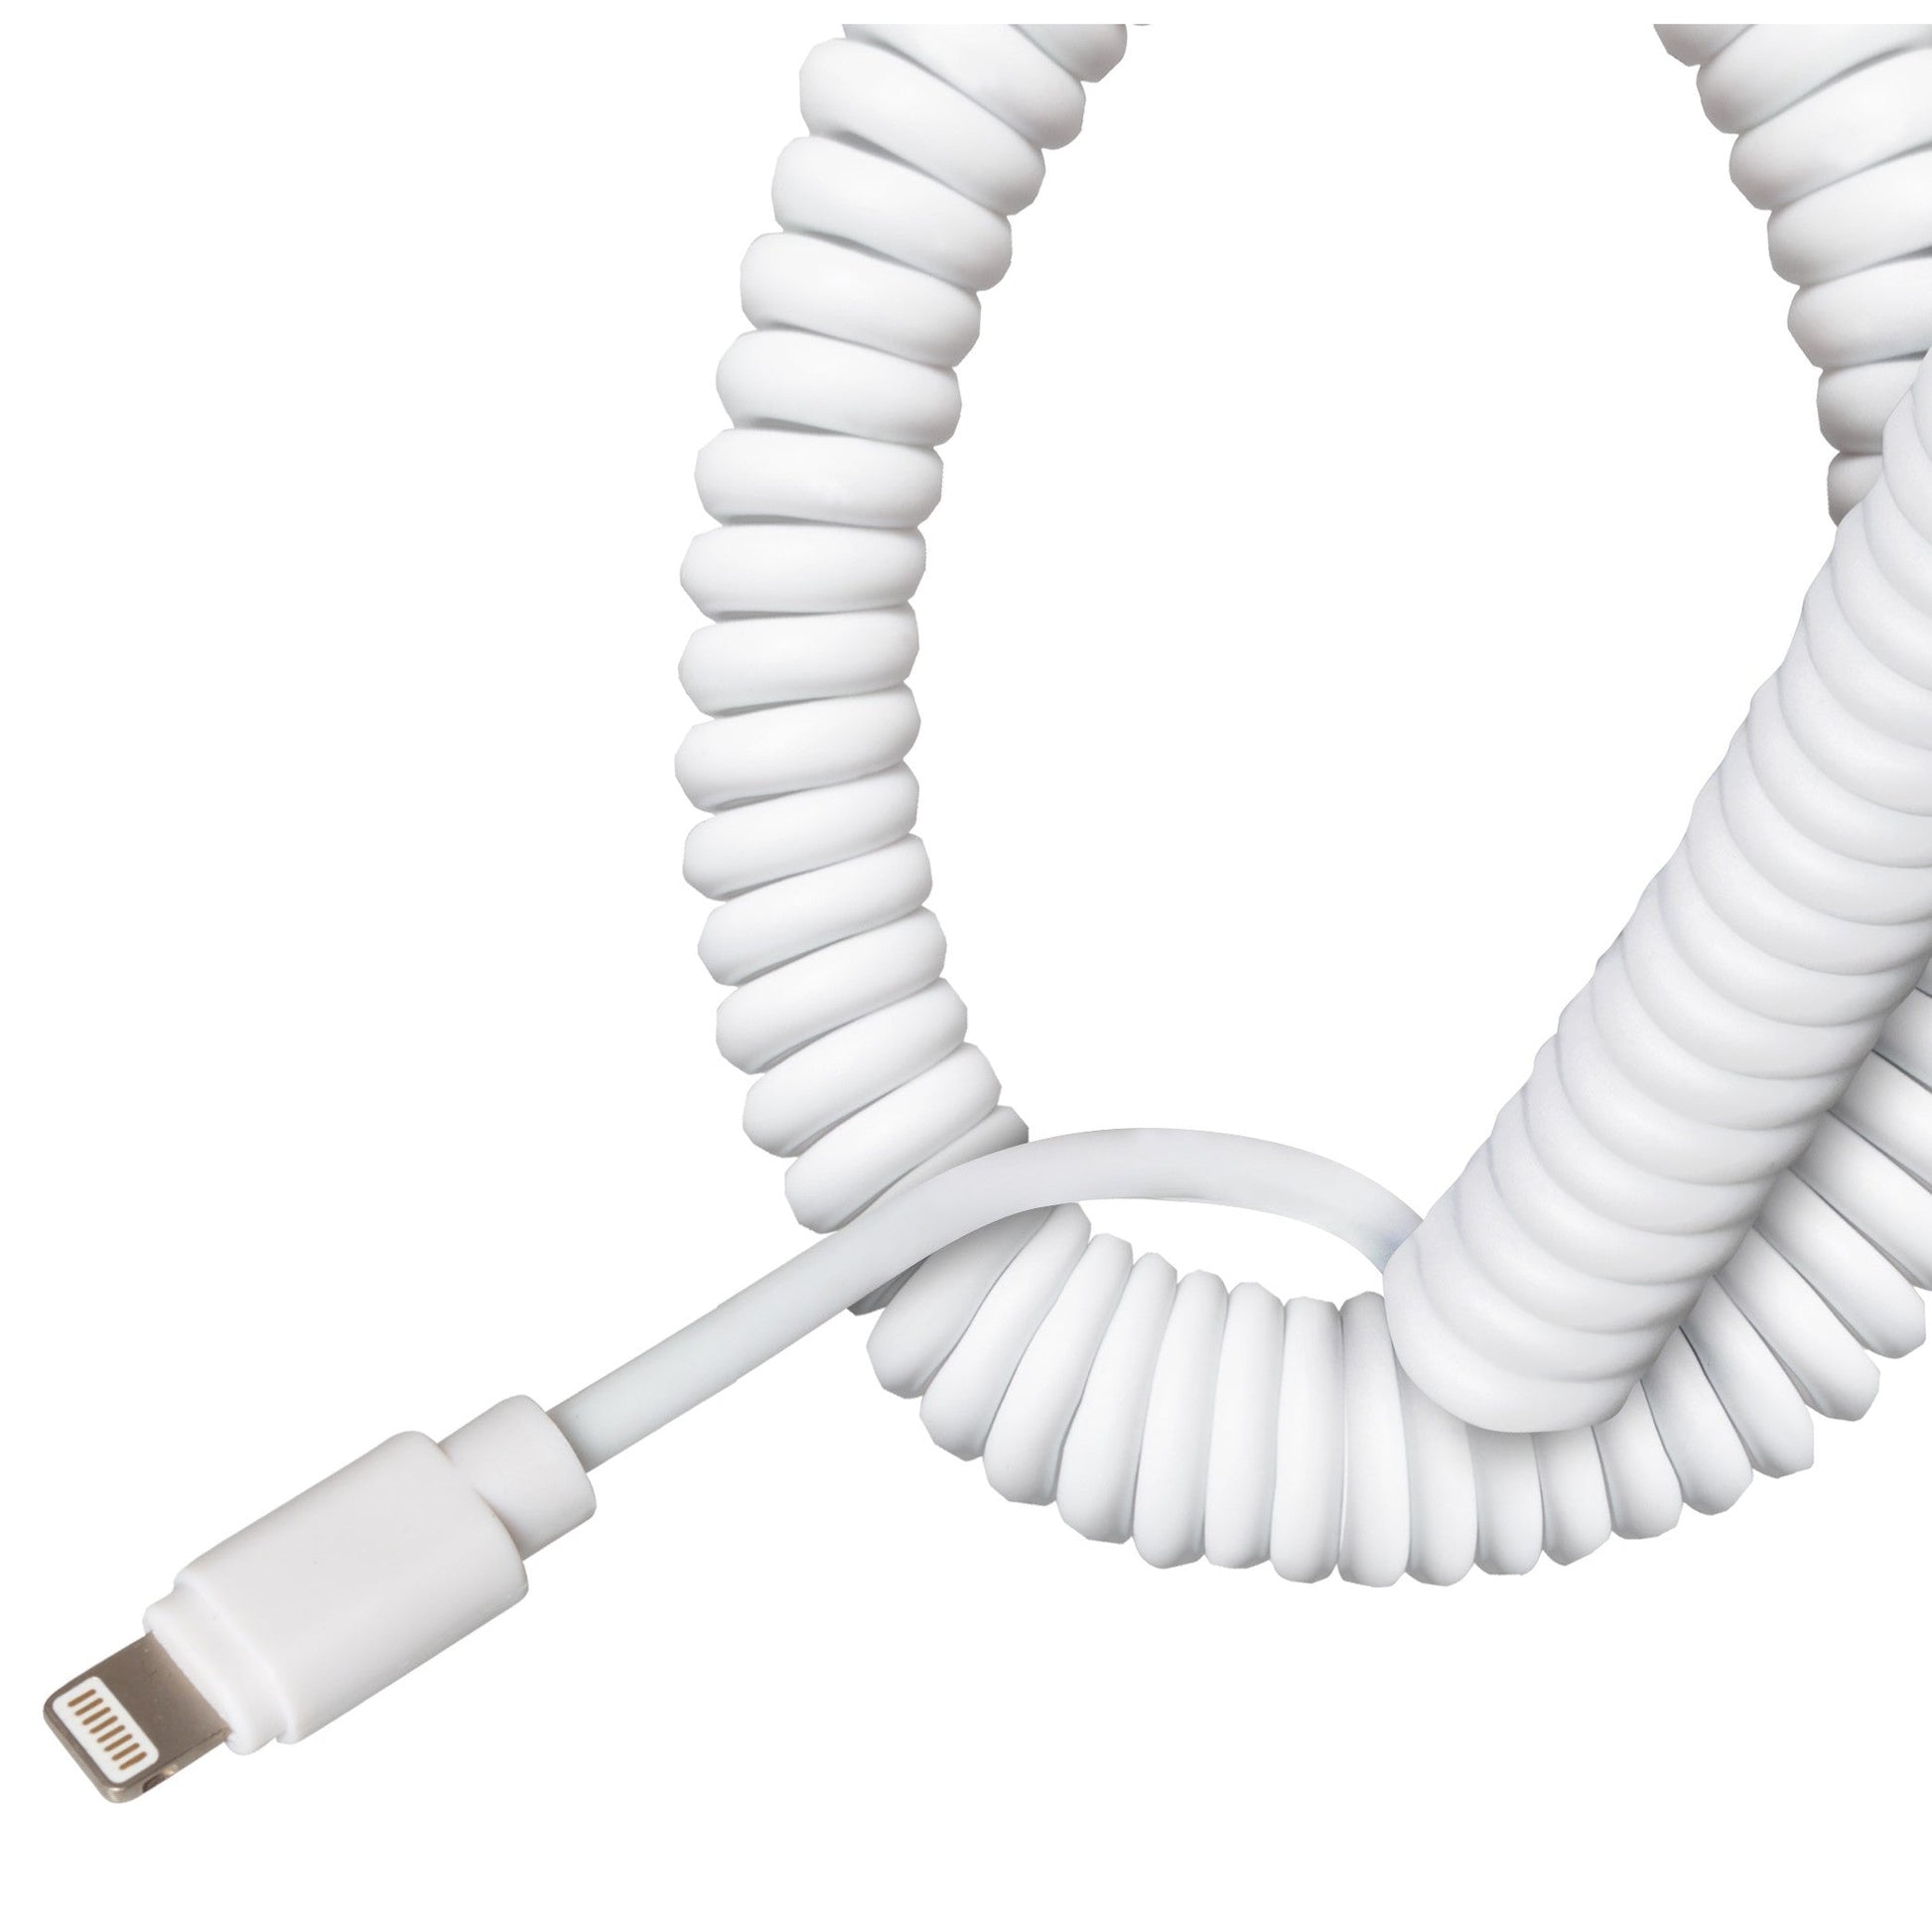 Maplin Premium Apple MFI Certified Lightning to USB-A 2.0 Coiled Cable - White, 1m - maplin.co.uk